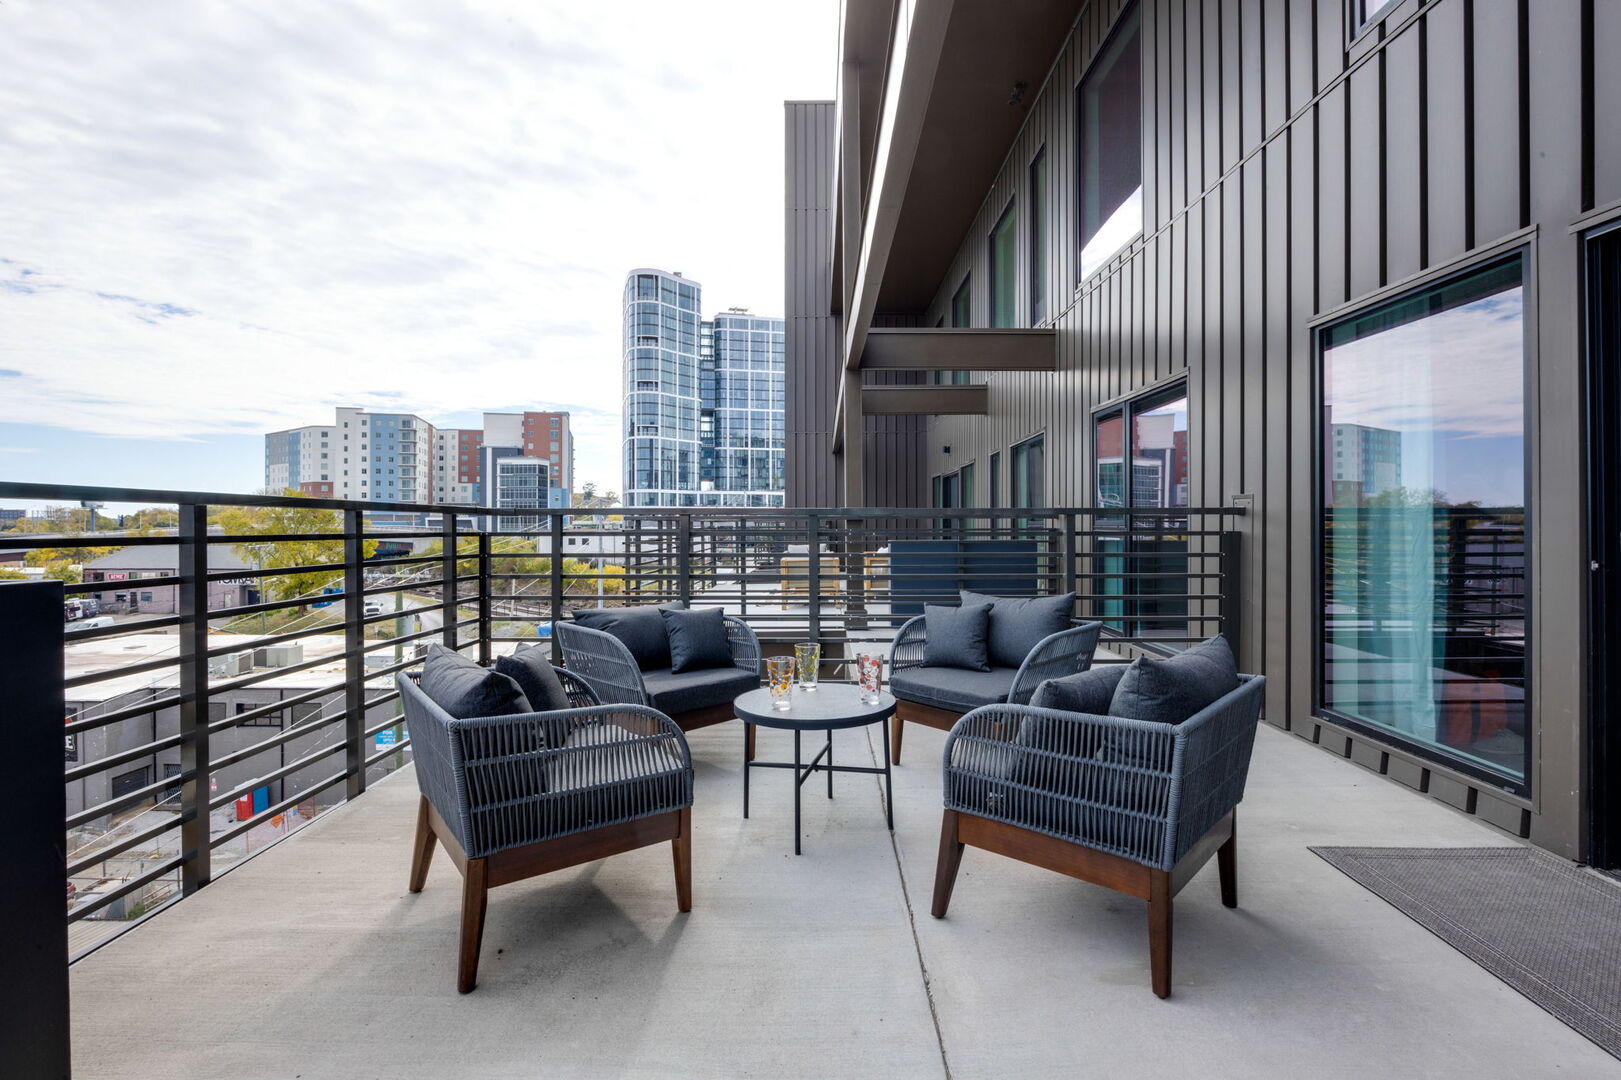 Main Level: Large private patio with a large lounge area, cornhole, giant Jenga, and additional seating overlooking the Nashville skyline.